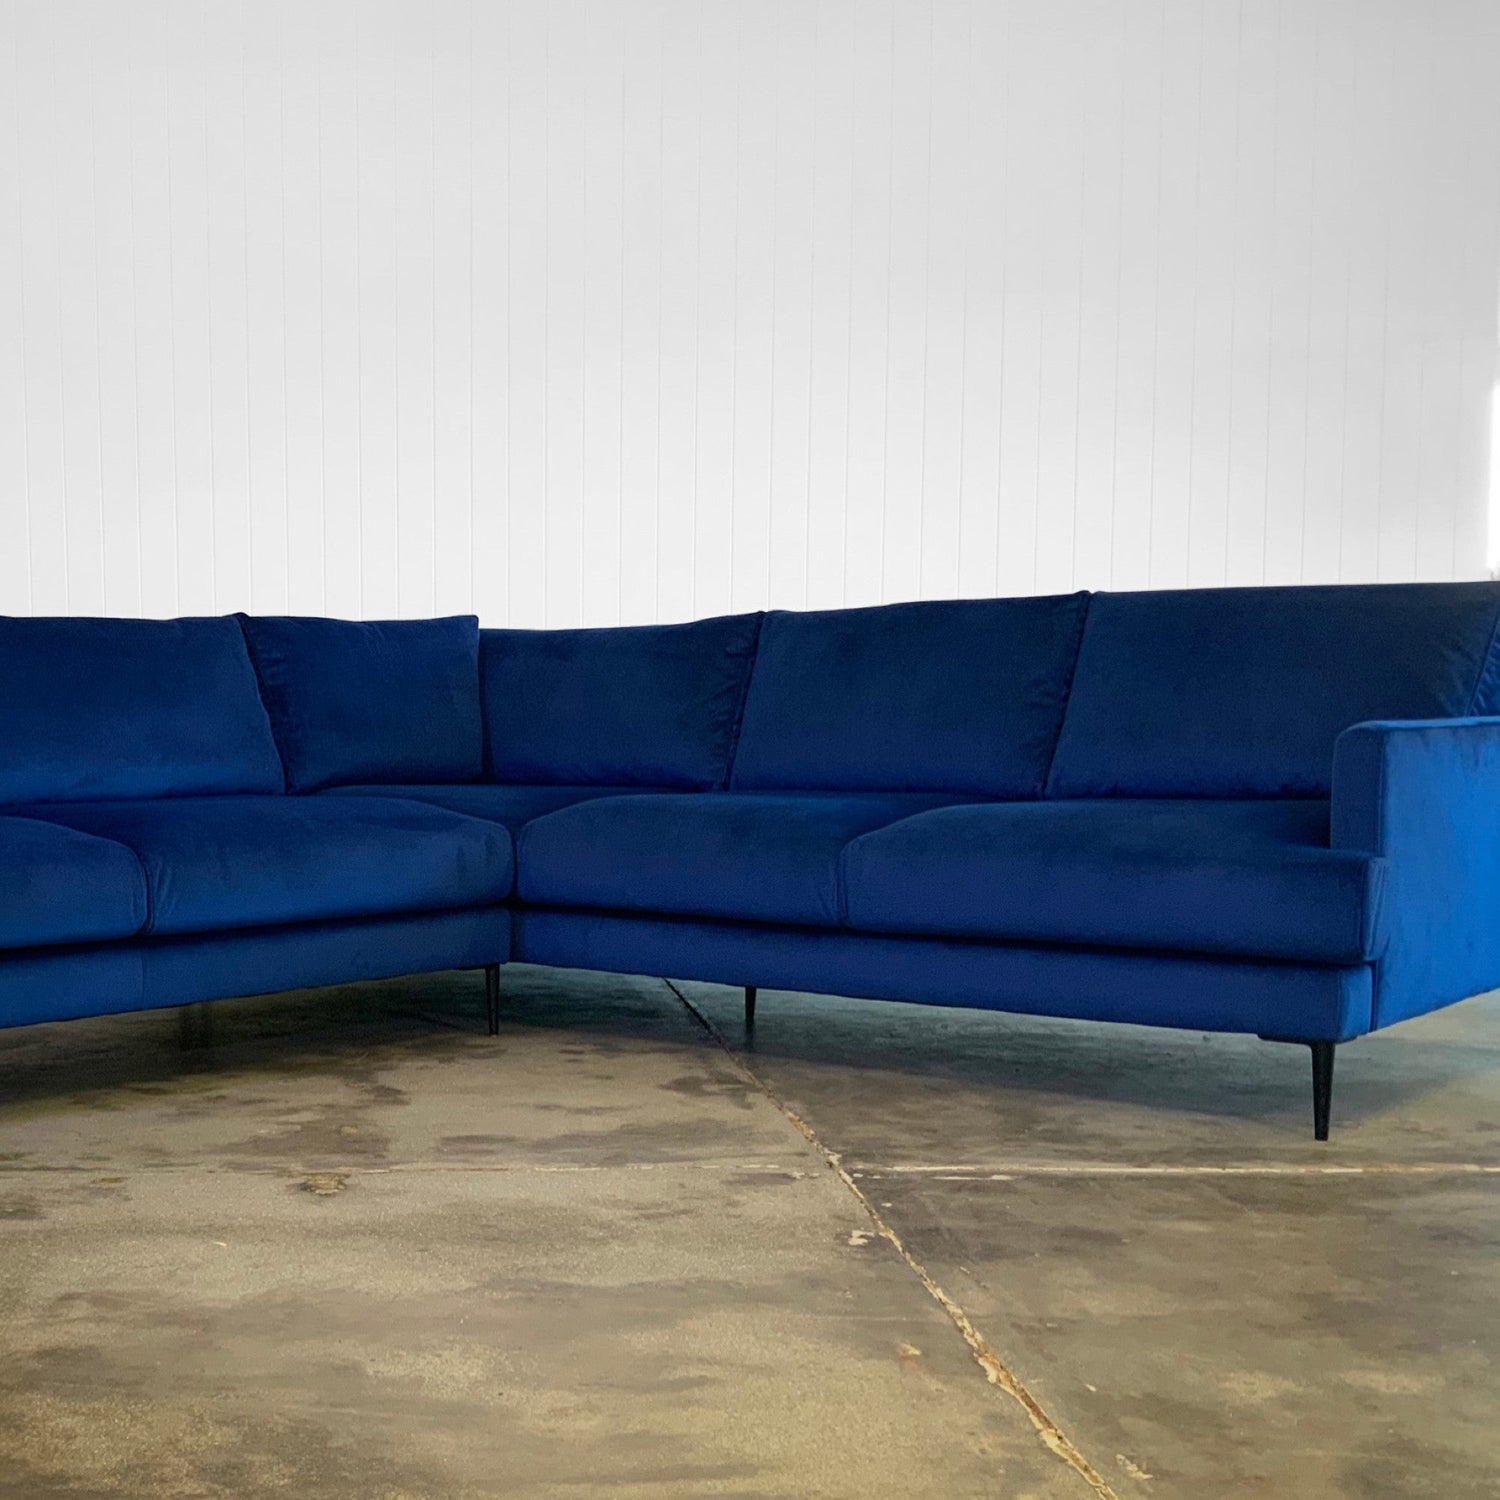 N.y.c. Loft Sofa | Value Fabrics Range Multiple Sizes And Options Available Made To Order In Wa